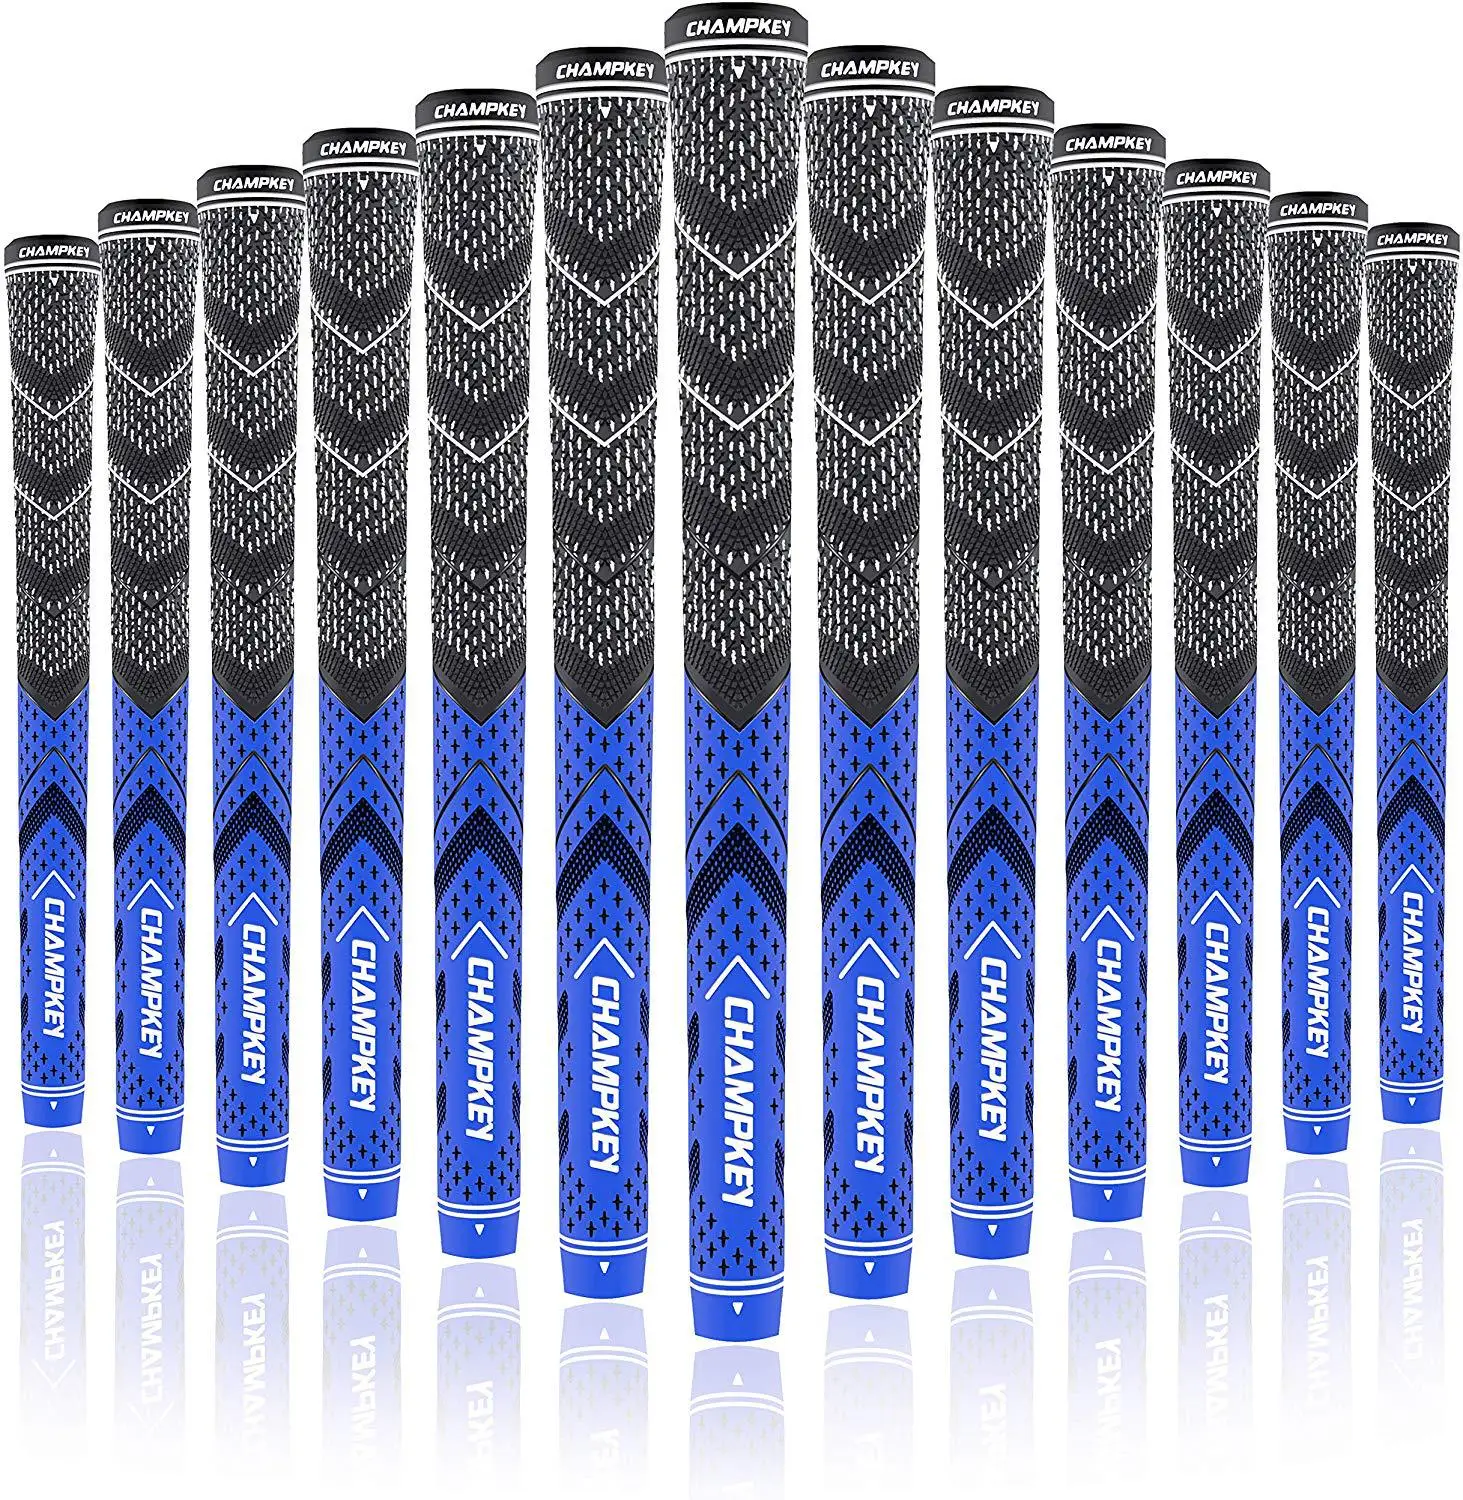 13pcs/Pack Midsize Professional Carbon Yarn Golf Irons Grips Golf Club Grips 4 Colors for Choice Agarre Del Palo de Golf